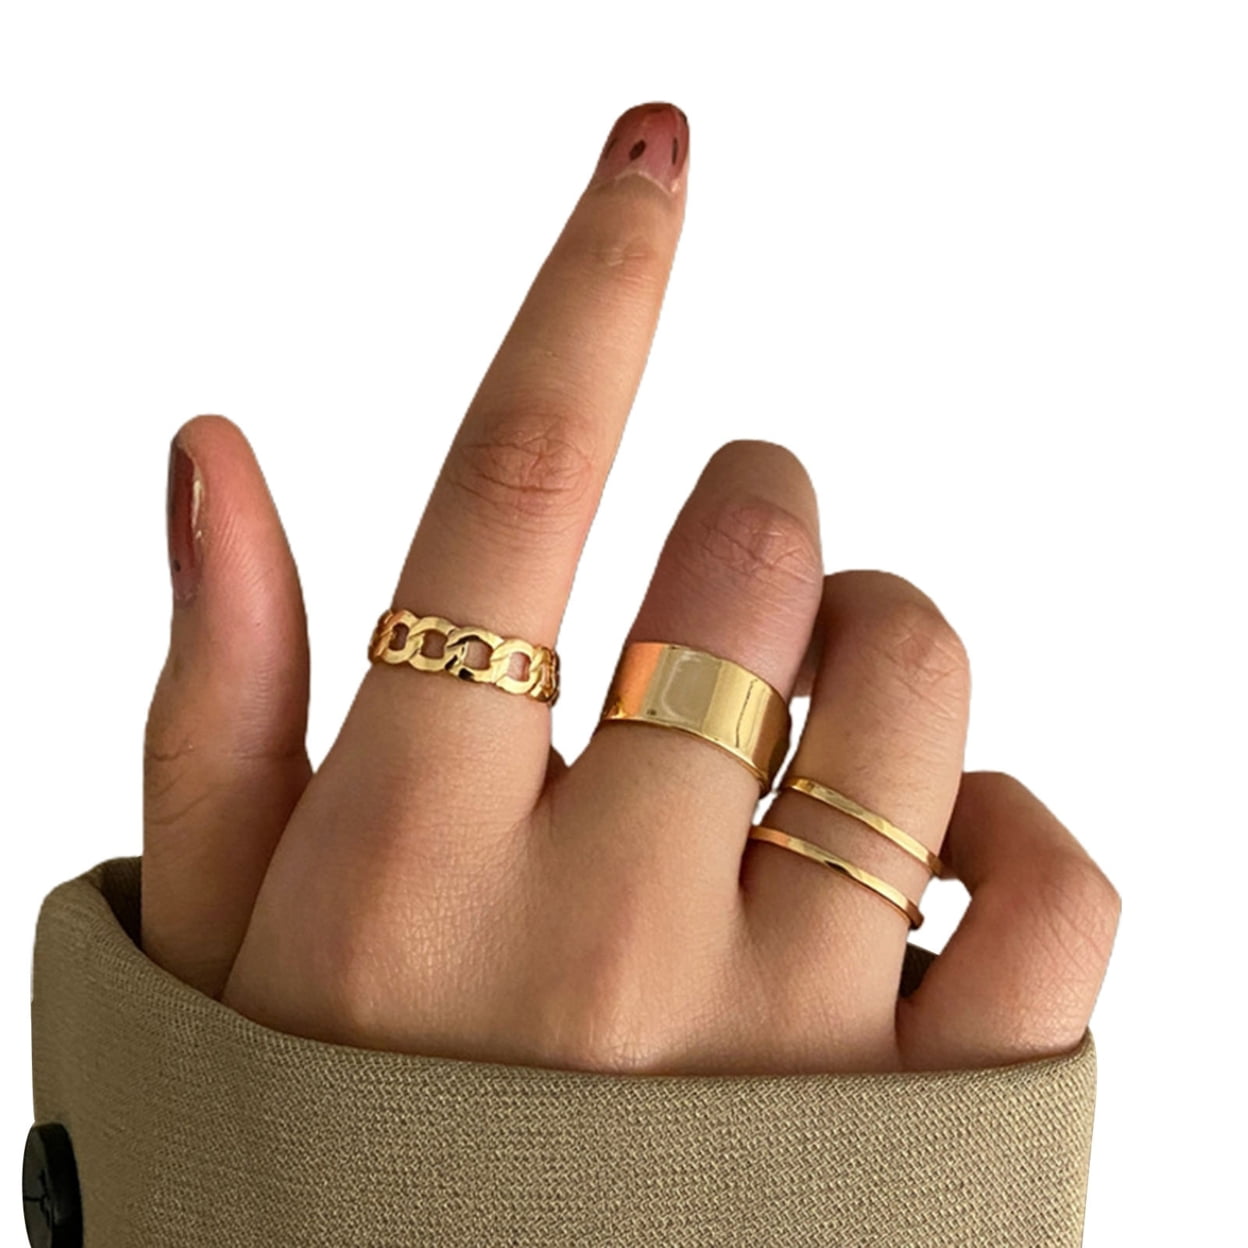 Ring Finger Meaning: What Does Each Finger Symbolize?